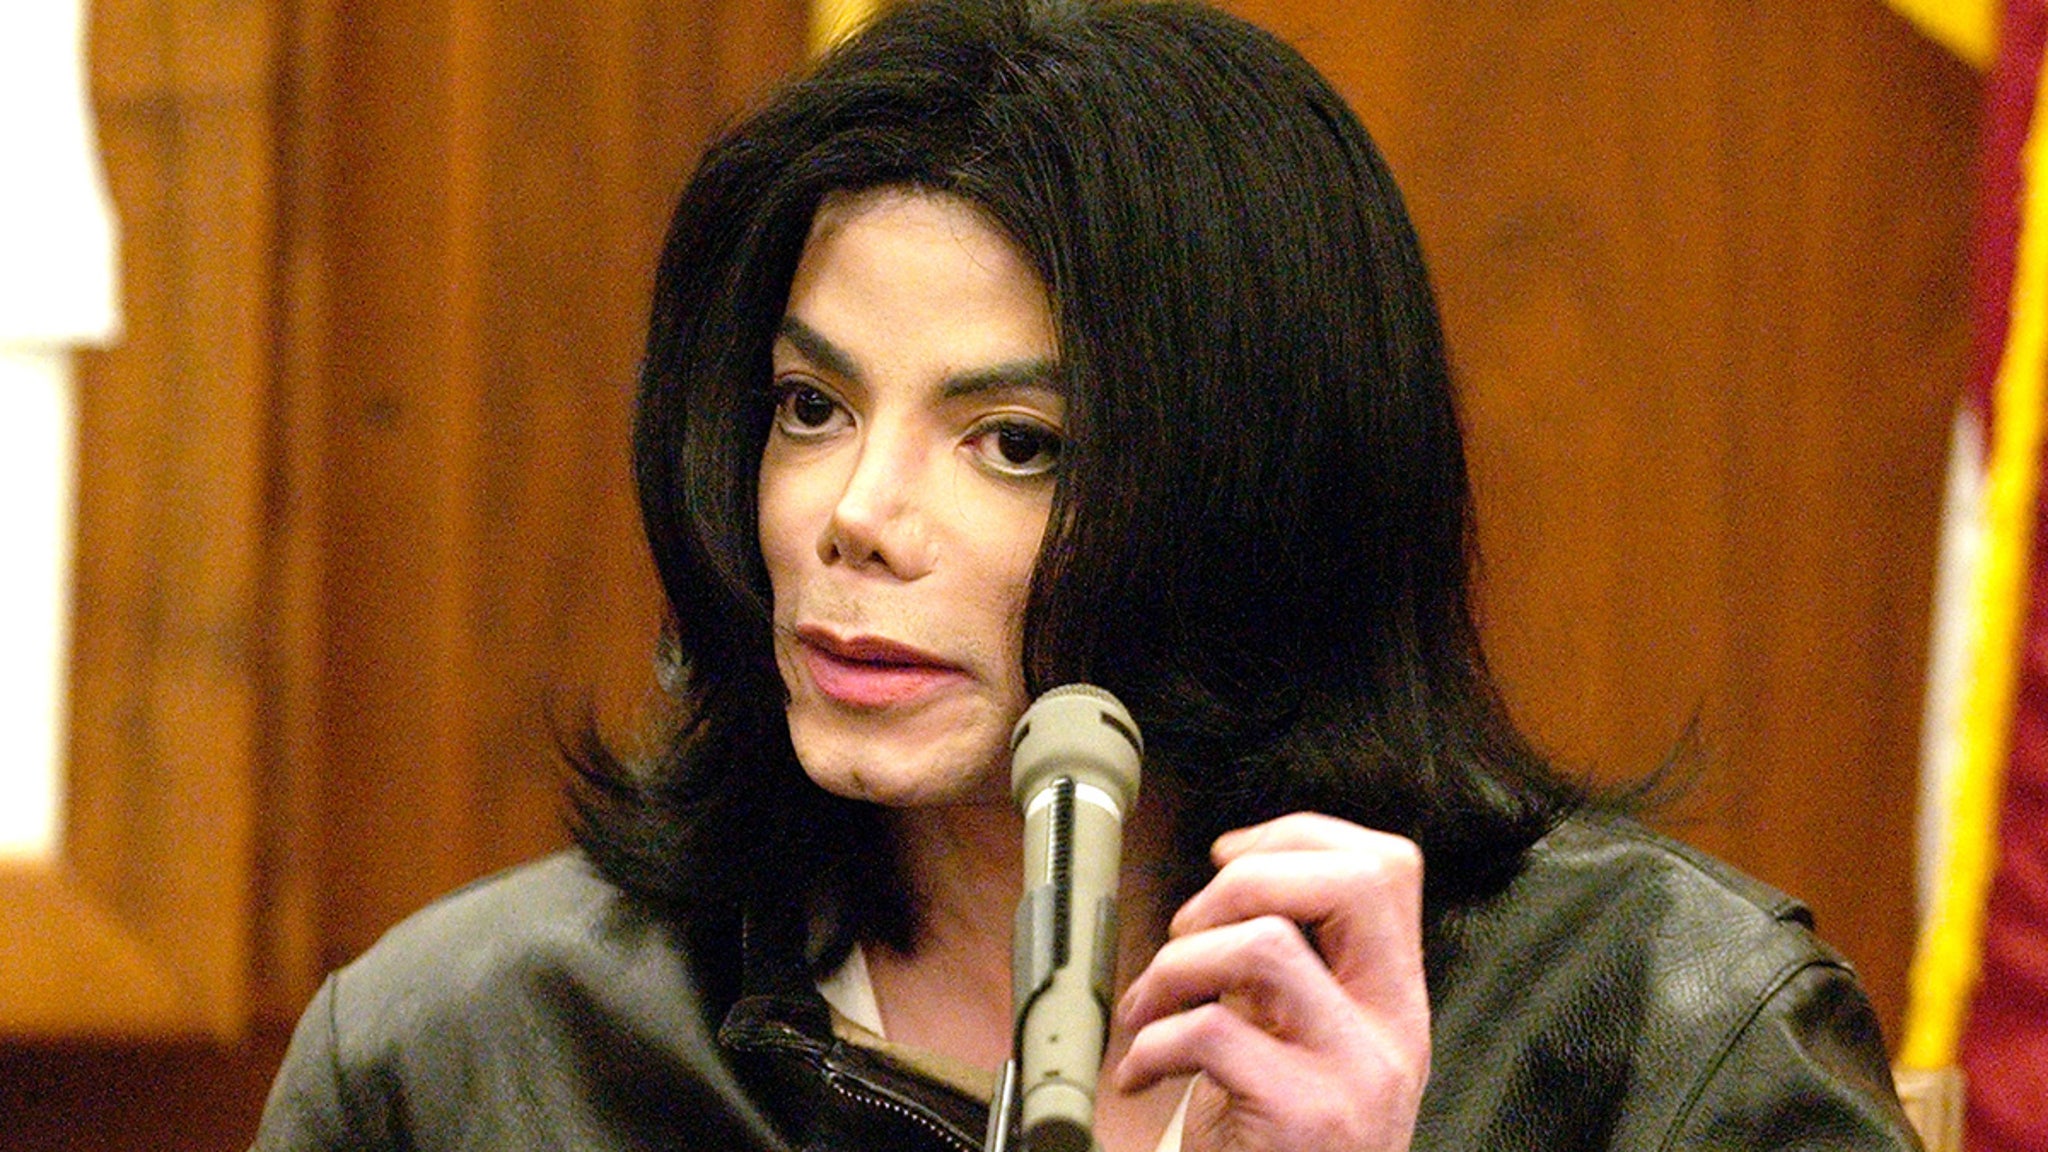 Michael Jackson Sexual Abuse Lawsuits Revived, Accusers Can Sue His Companies